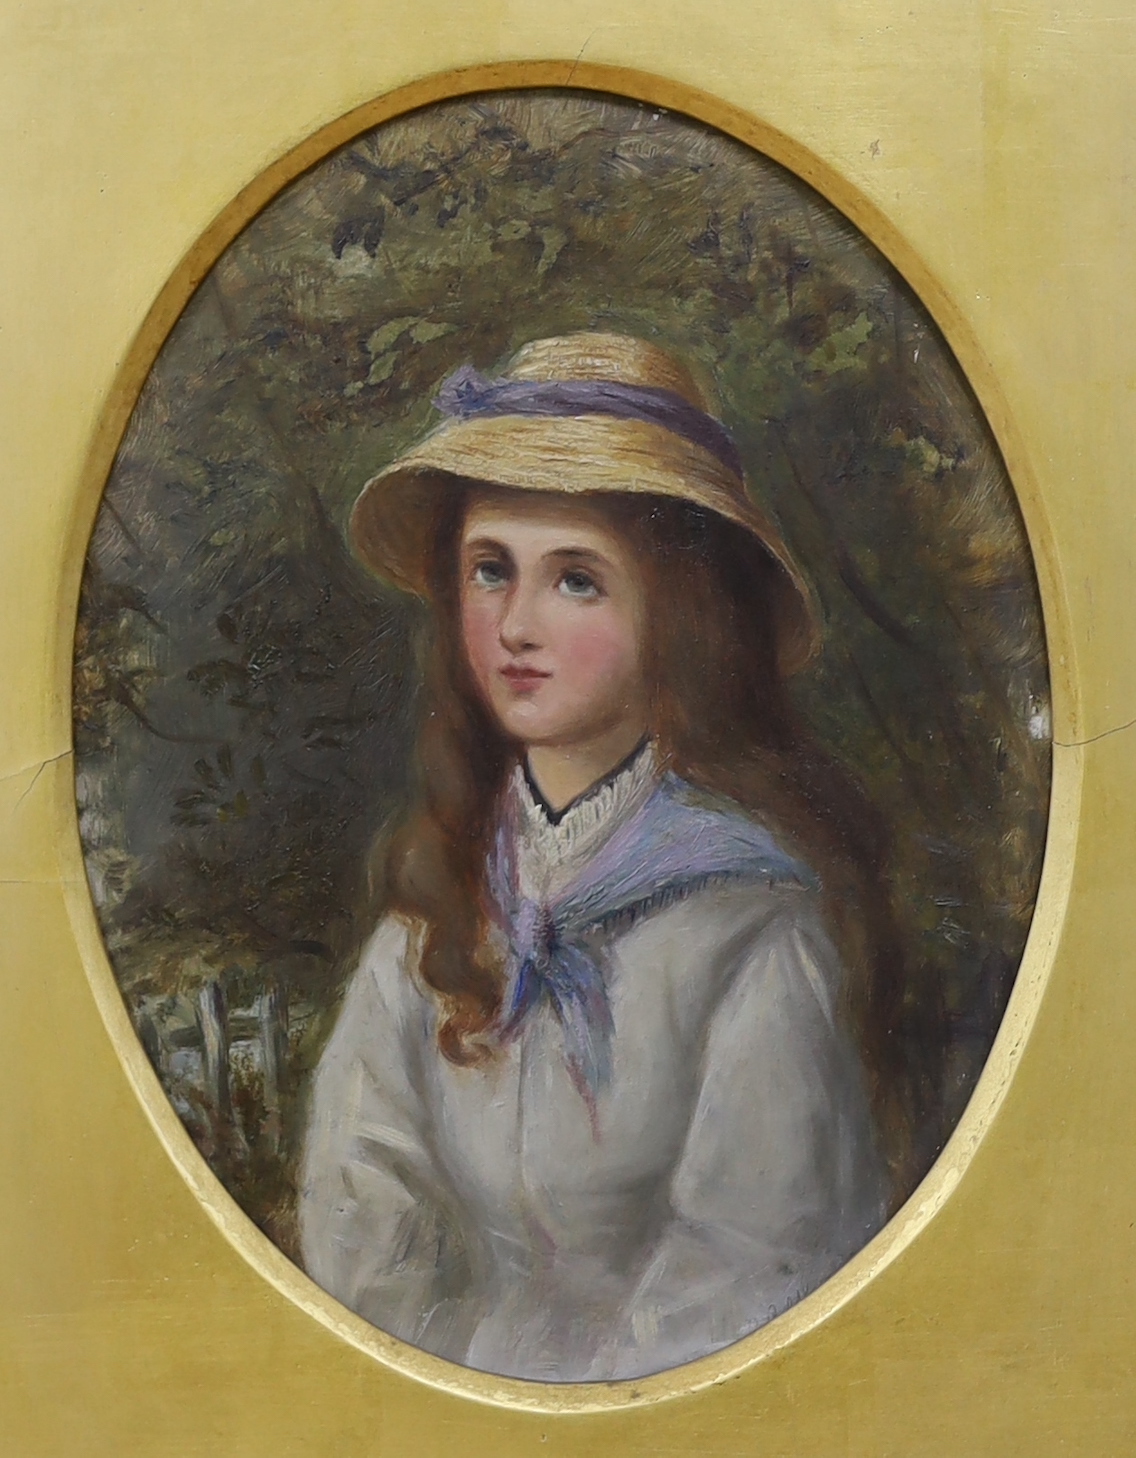 Early 20th century English School, oil on board, Half length portrait of a young lady wearing a bonnet, indistinctly signed, oval, 20 x 15cm, ornate gilt frame